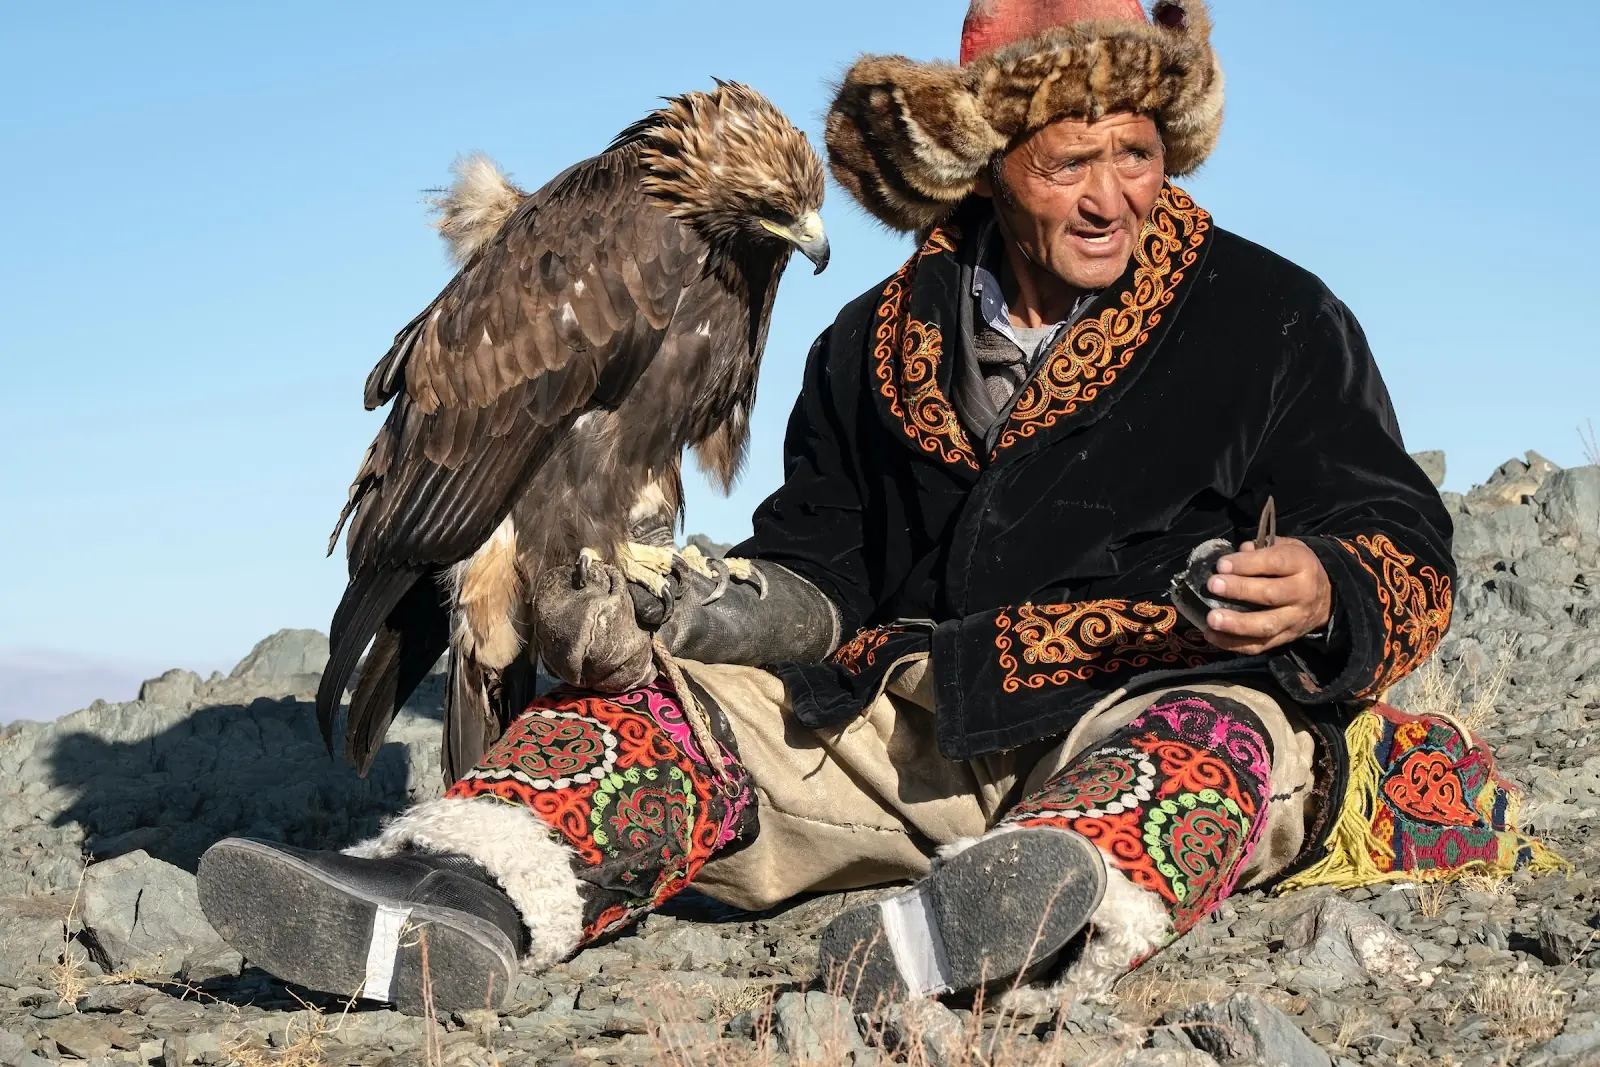 A Mongolian man sits with an eagle resting on his arm. 